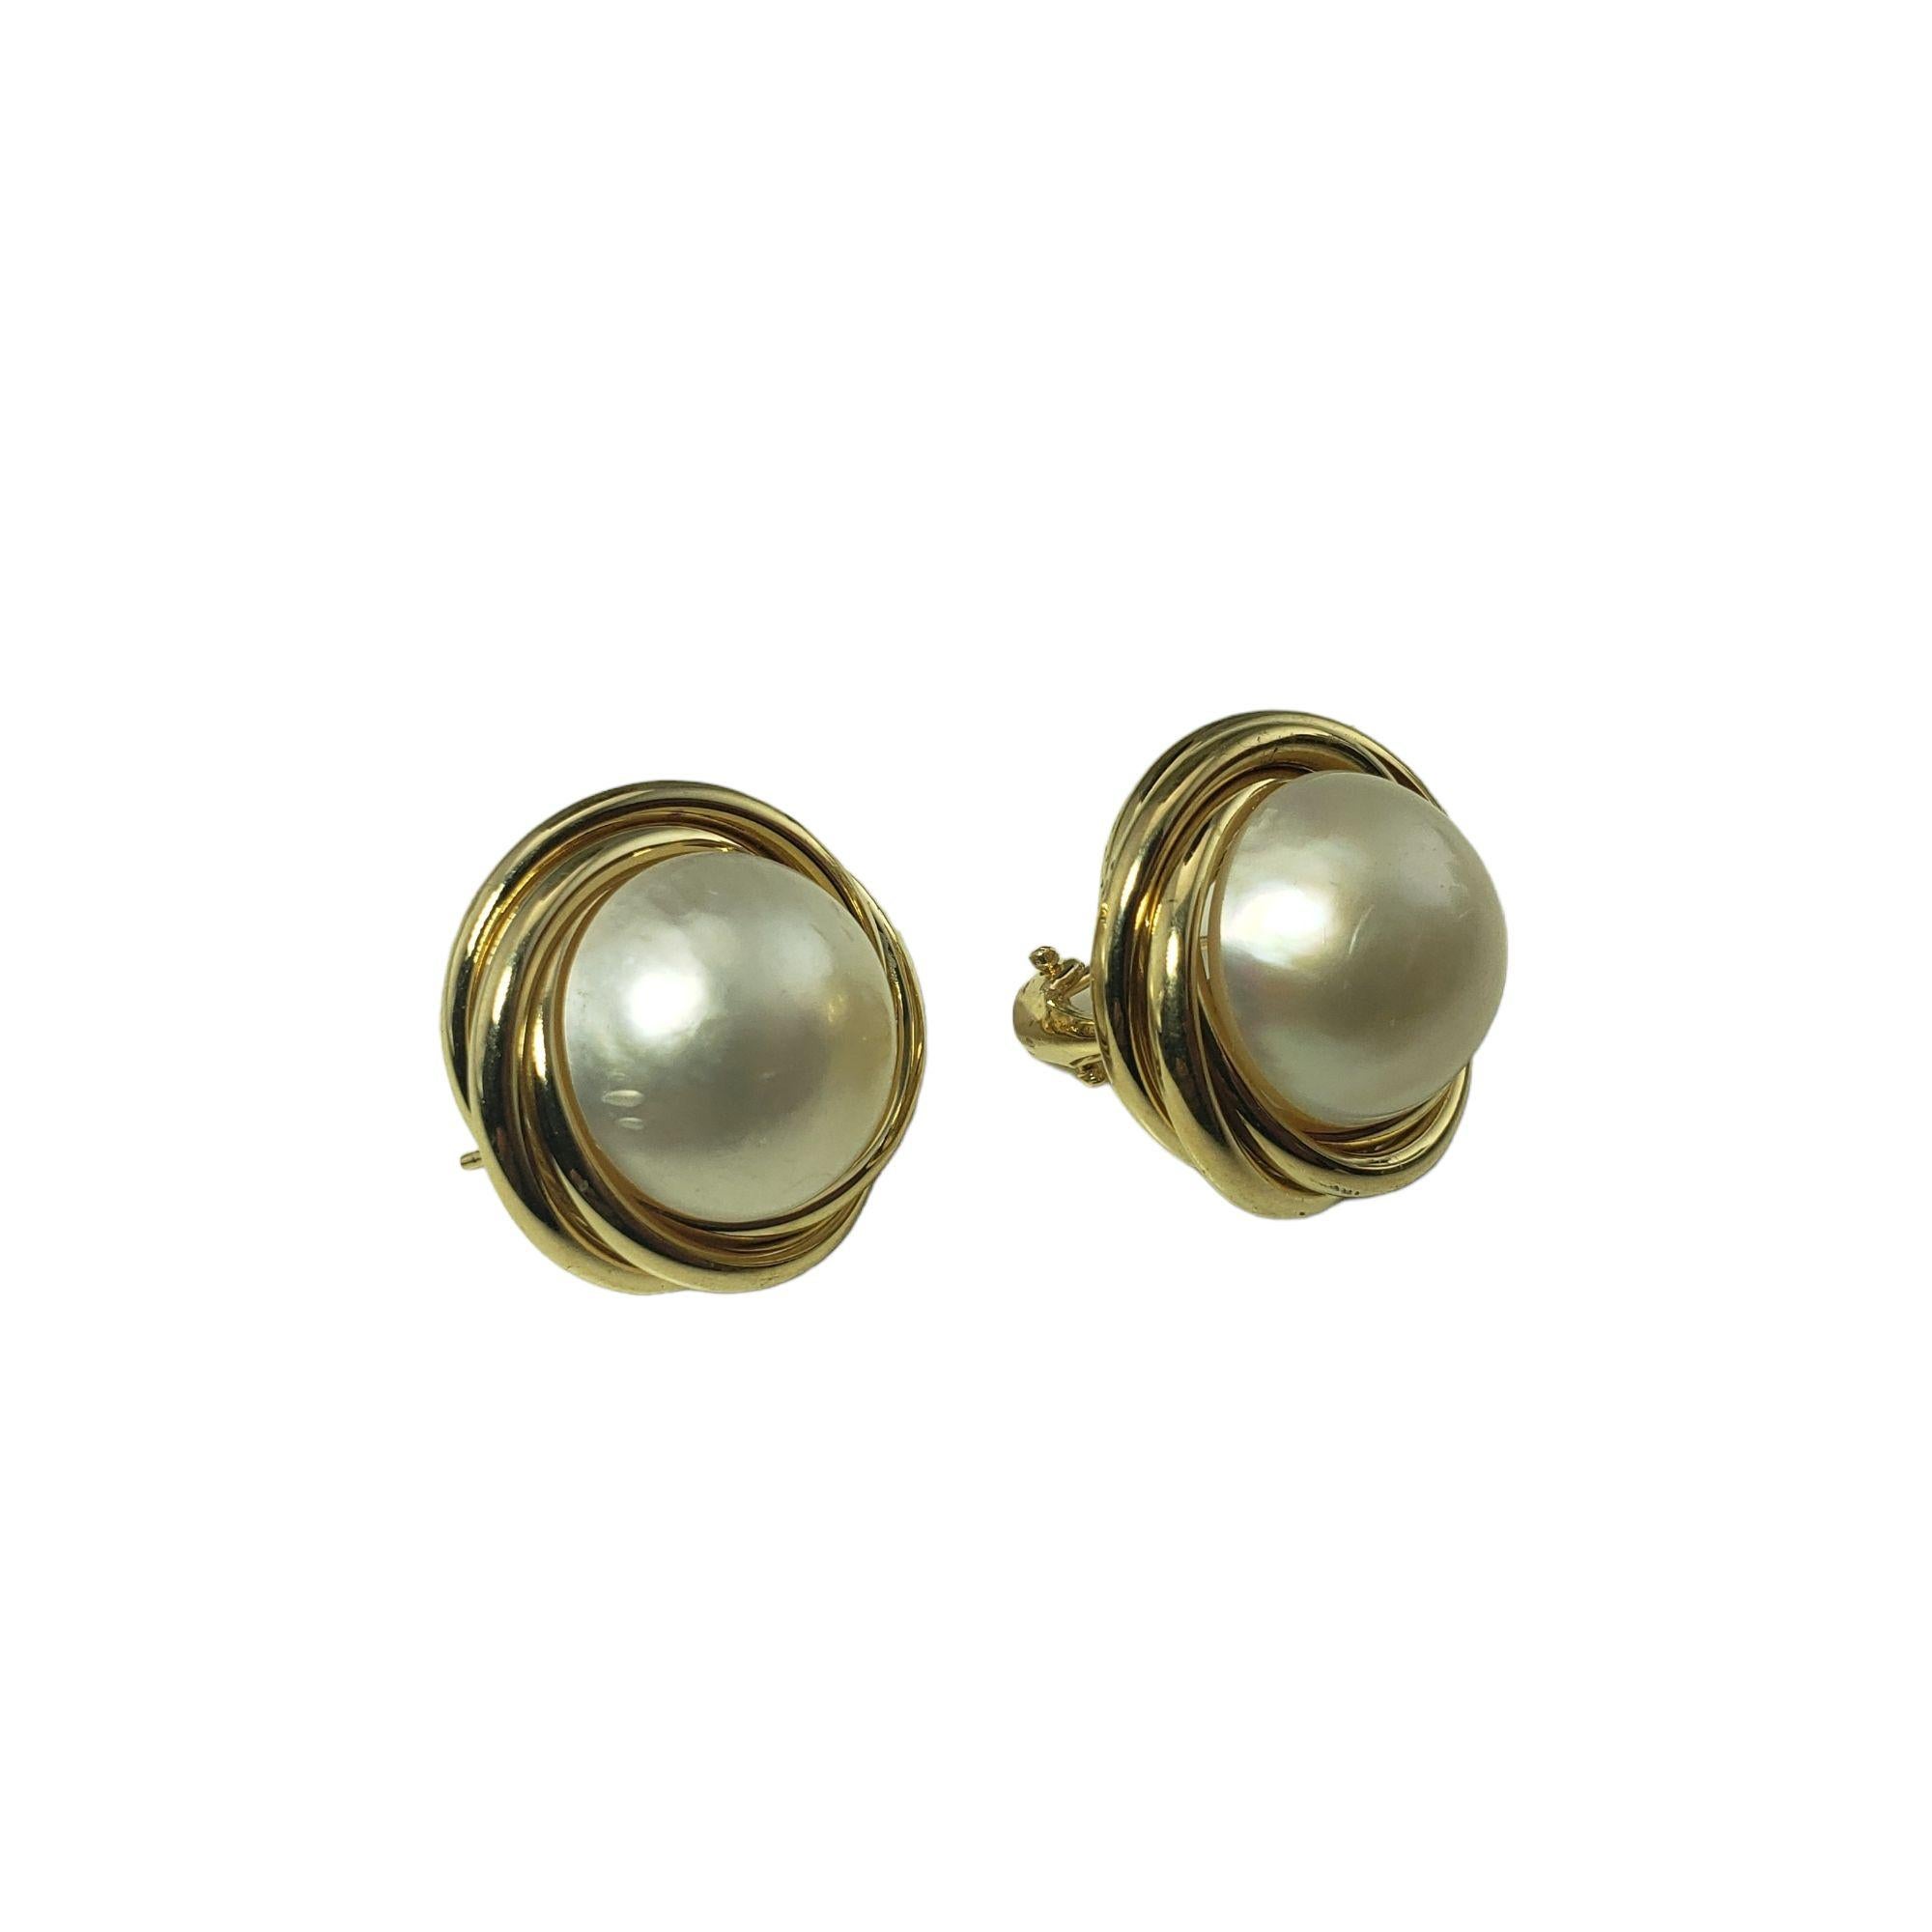 Vintage 14 Karat Yellow Gold and Mabe Pearl Earrings-

These lovely earrings each feature one Mabe pearl (15 mm) set in beautifully detailed 14K yellow gold. Omega back closures.

Matching pendant: RL-00012967

Size: 22 mm

Weight: 8.2 dwt. / 12.8